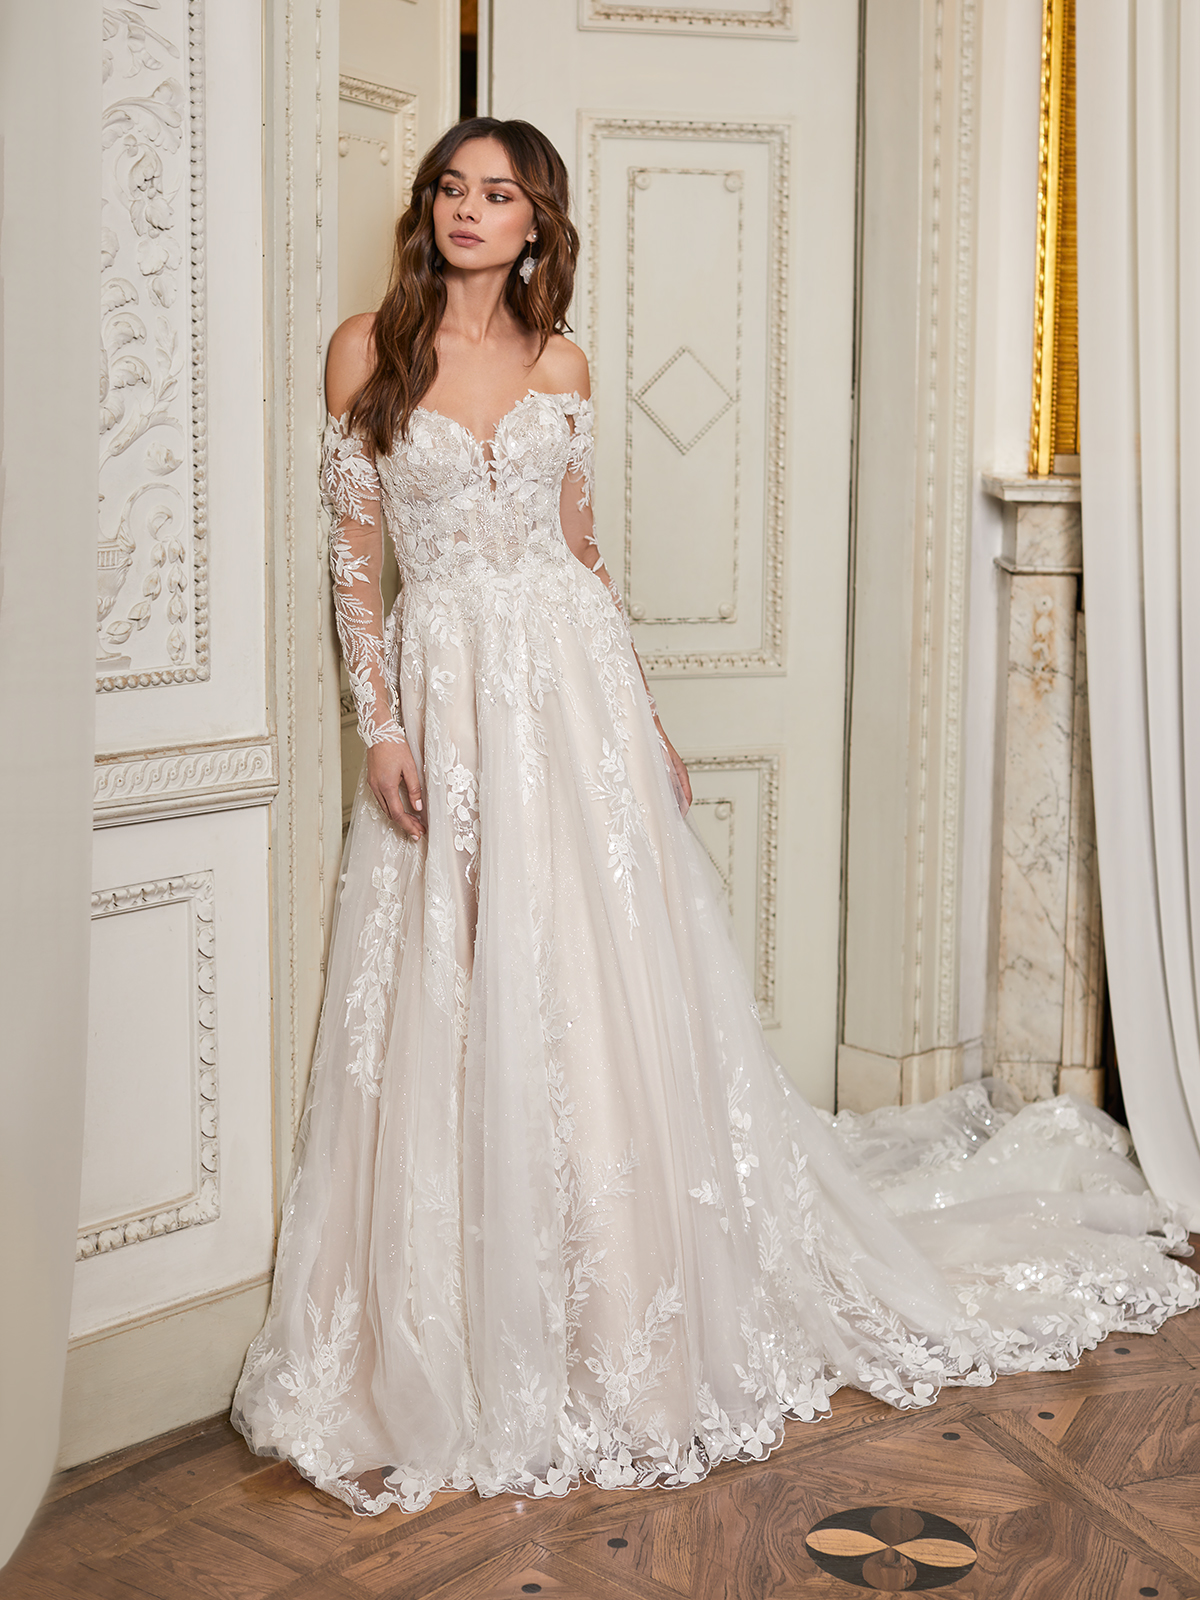 Winter Wedding Dresses – What to Wear When It Is Cold